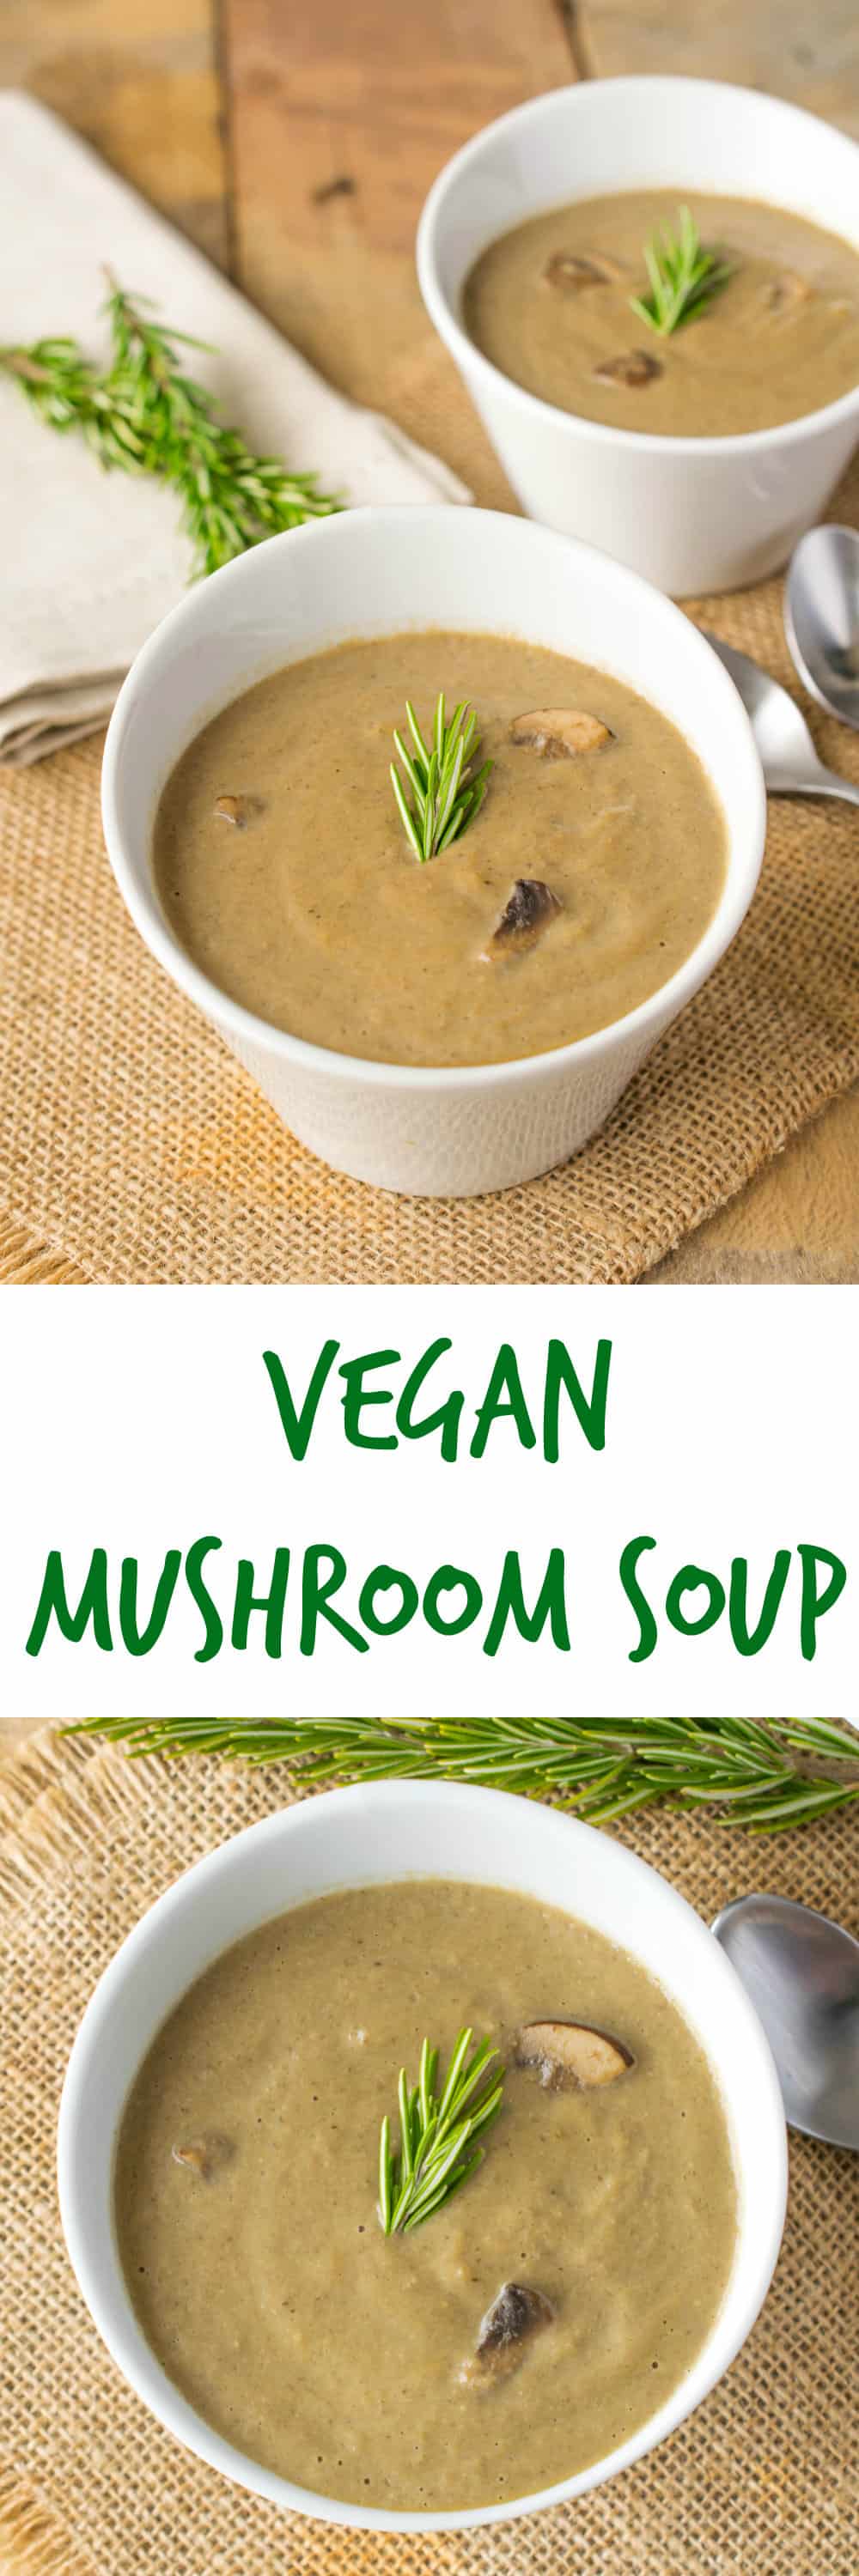 Vegan mushroom soup. A healthy and flavorful soup minus the cream. Fresh mushrooms, leeks, garlic and rosemary cooked in mushroom broth and blended with cashews.